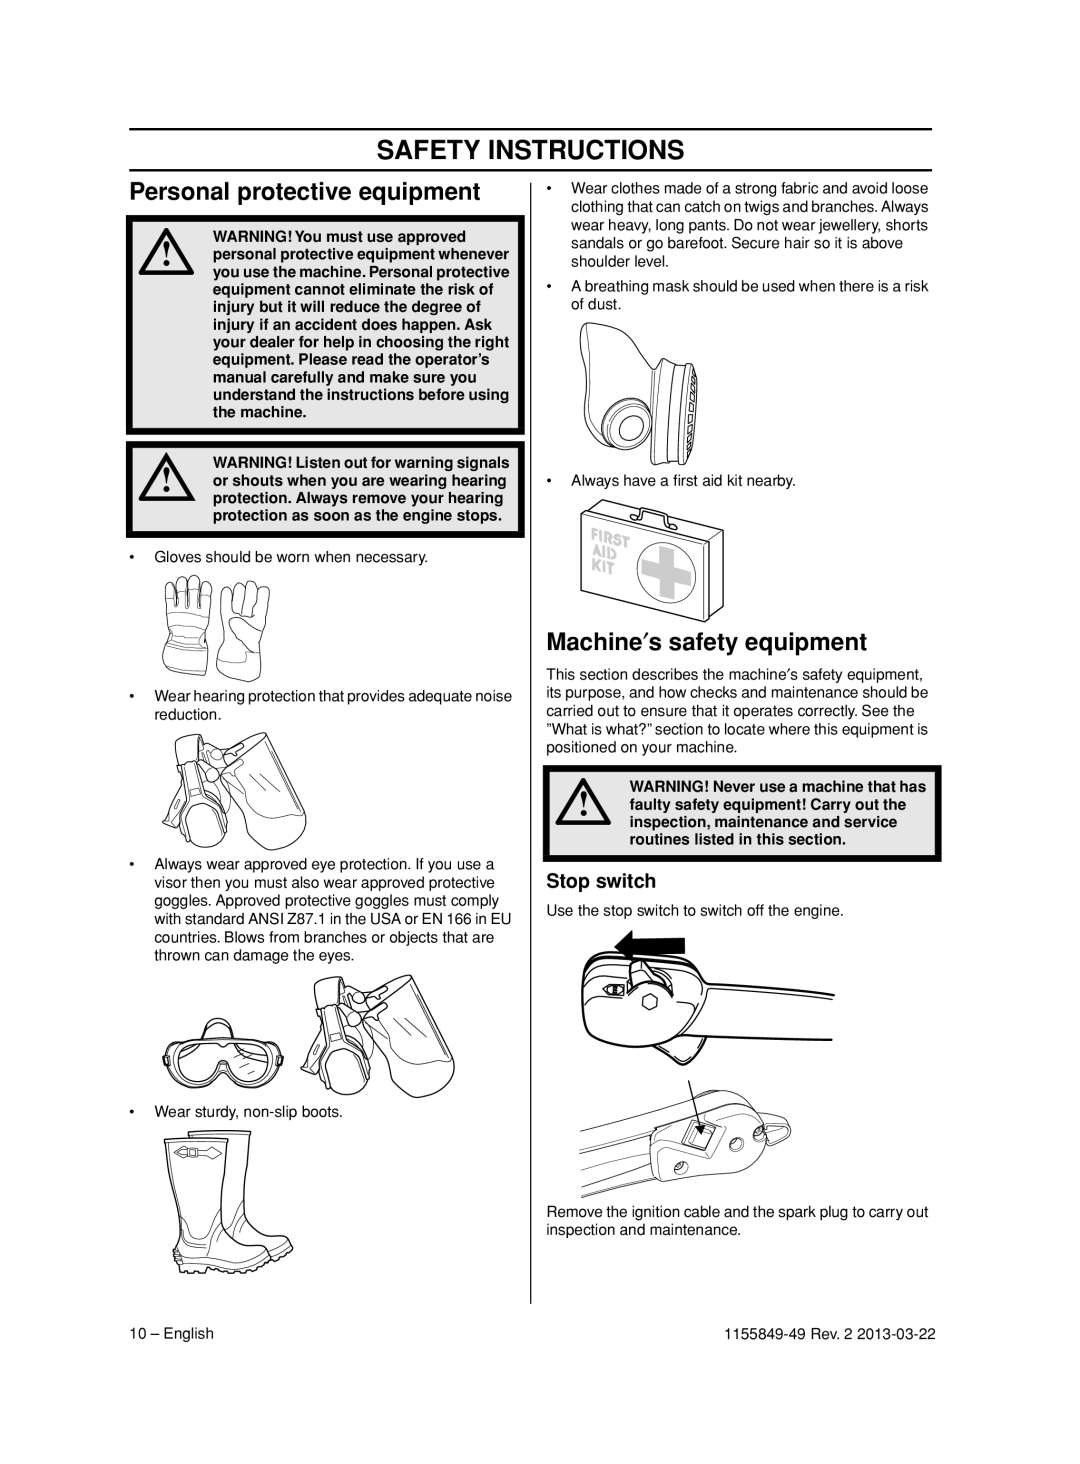 Husqvarna 966631102, 966629602 Safety Instructions, Personal protective equipment, Machine′s safety equipment, Stop switch 